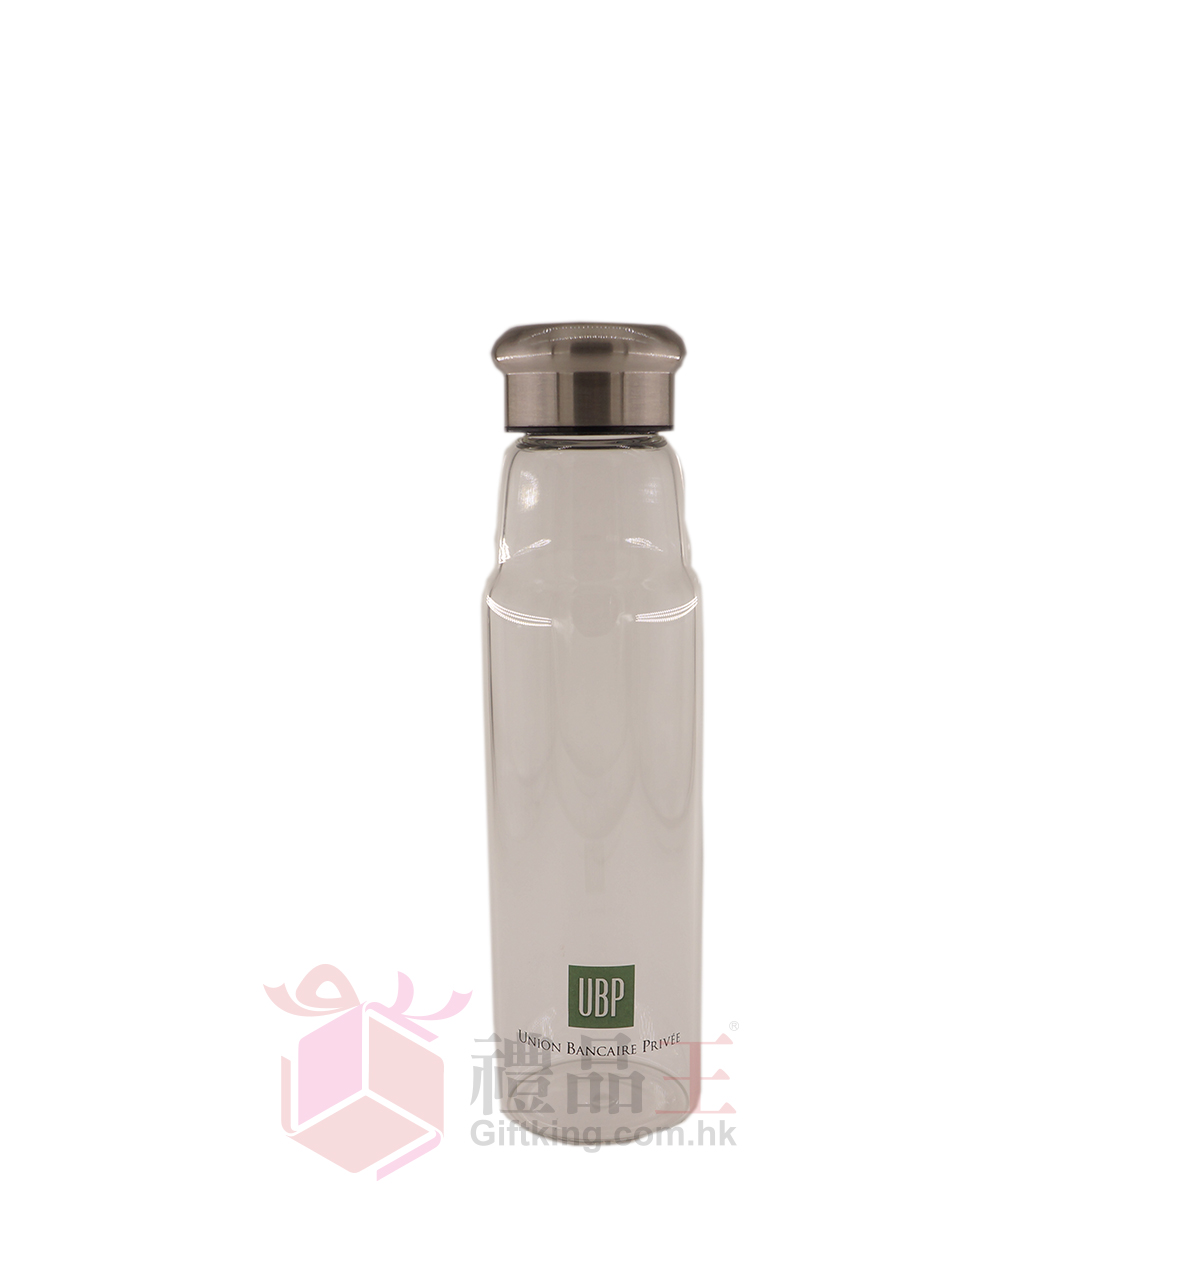 UBP heat-resistant glass water bottle (Home gift)